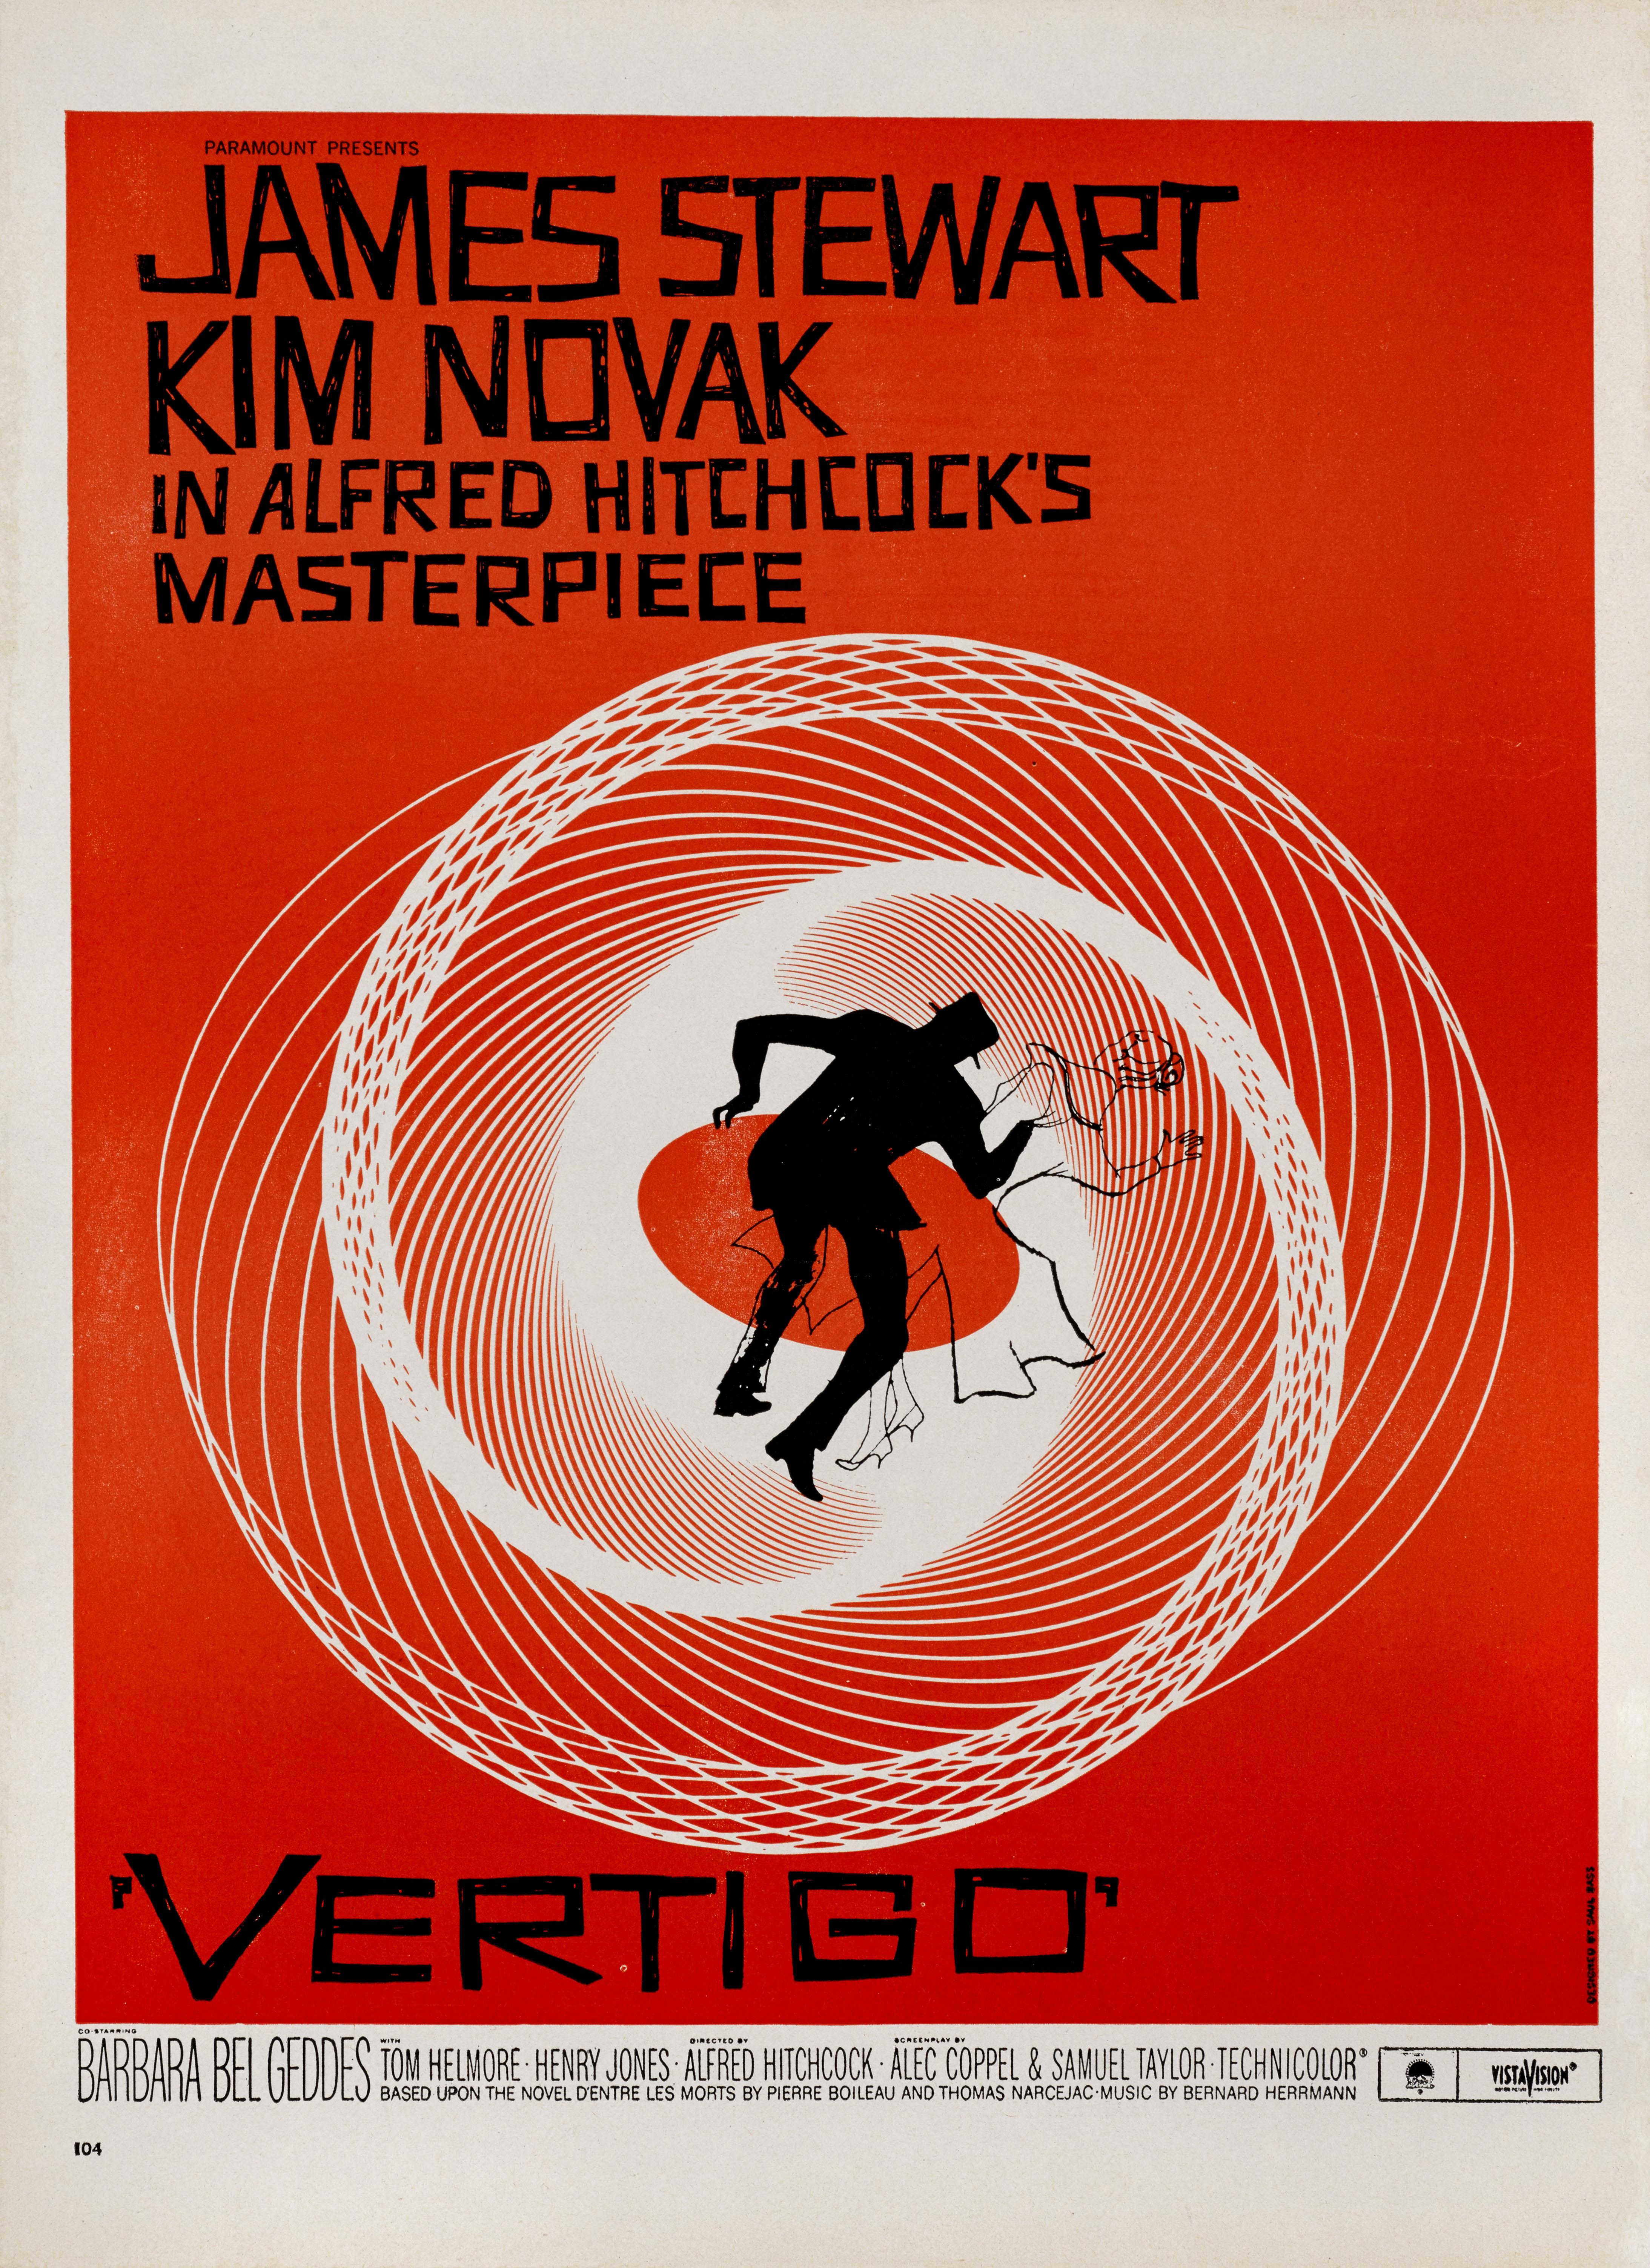 Original US trade advertisement for Alfred Hitchcock's 1958 Classic Thriller starring James Stewart, Kim Novak. The art work is by the renowned graphic designer Saul Bass (1920-1996). 
This is the fourth and final time that James Stewart would work